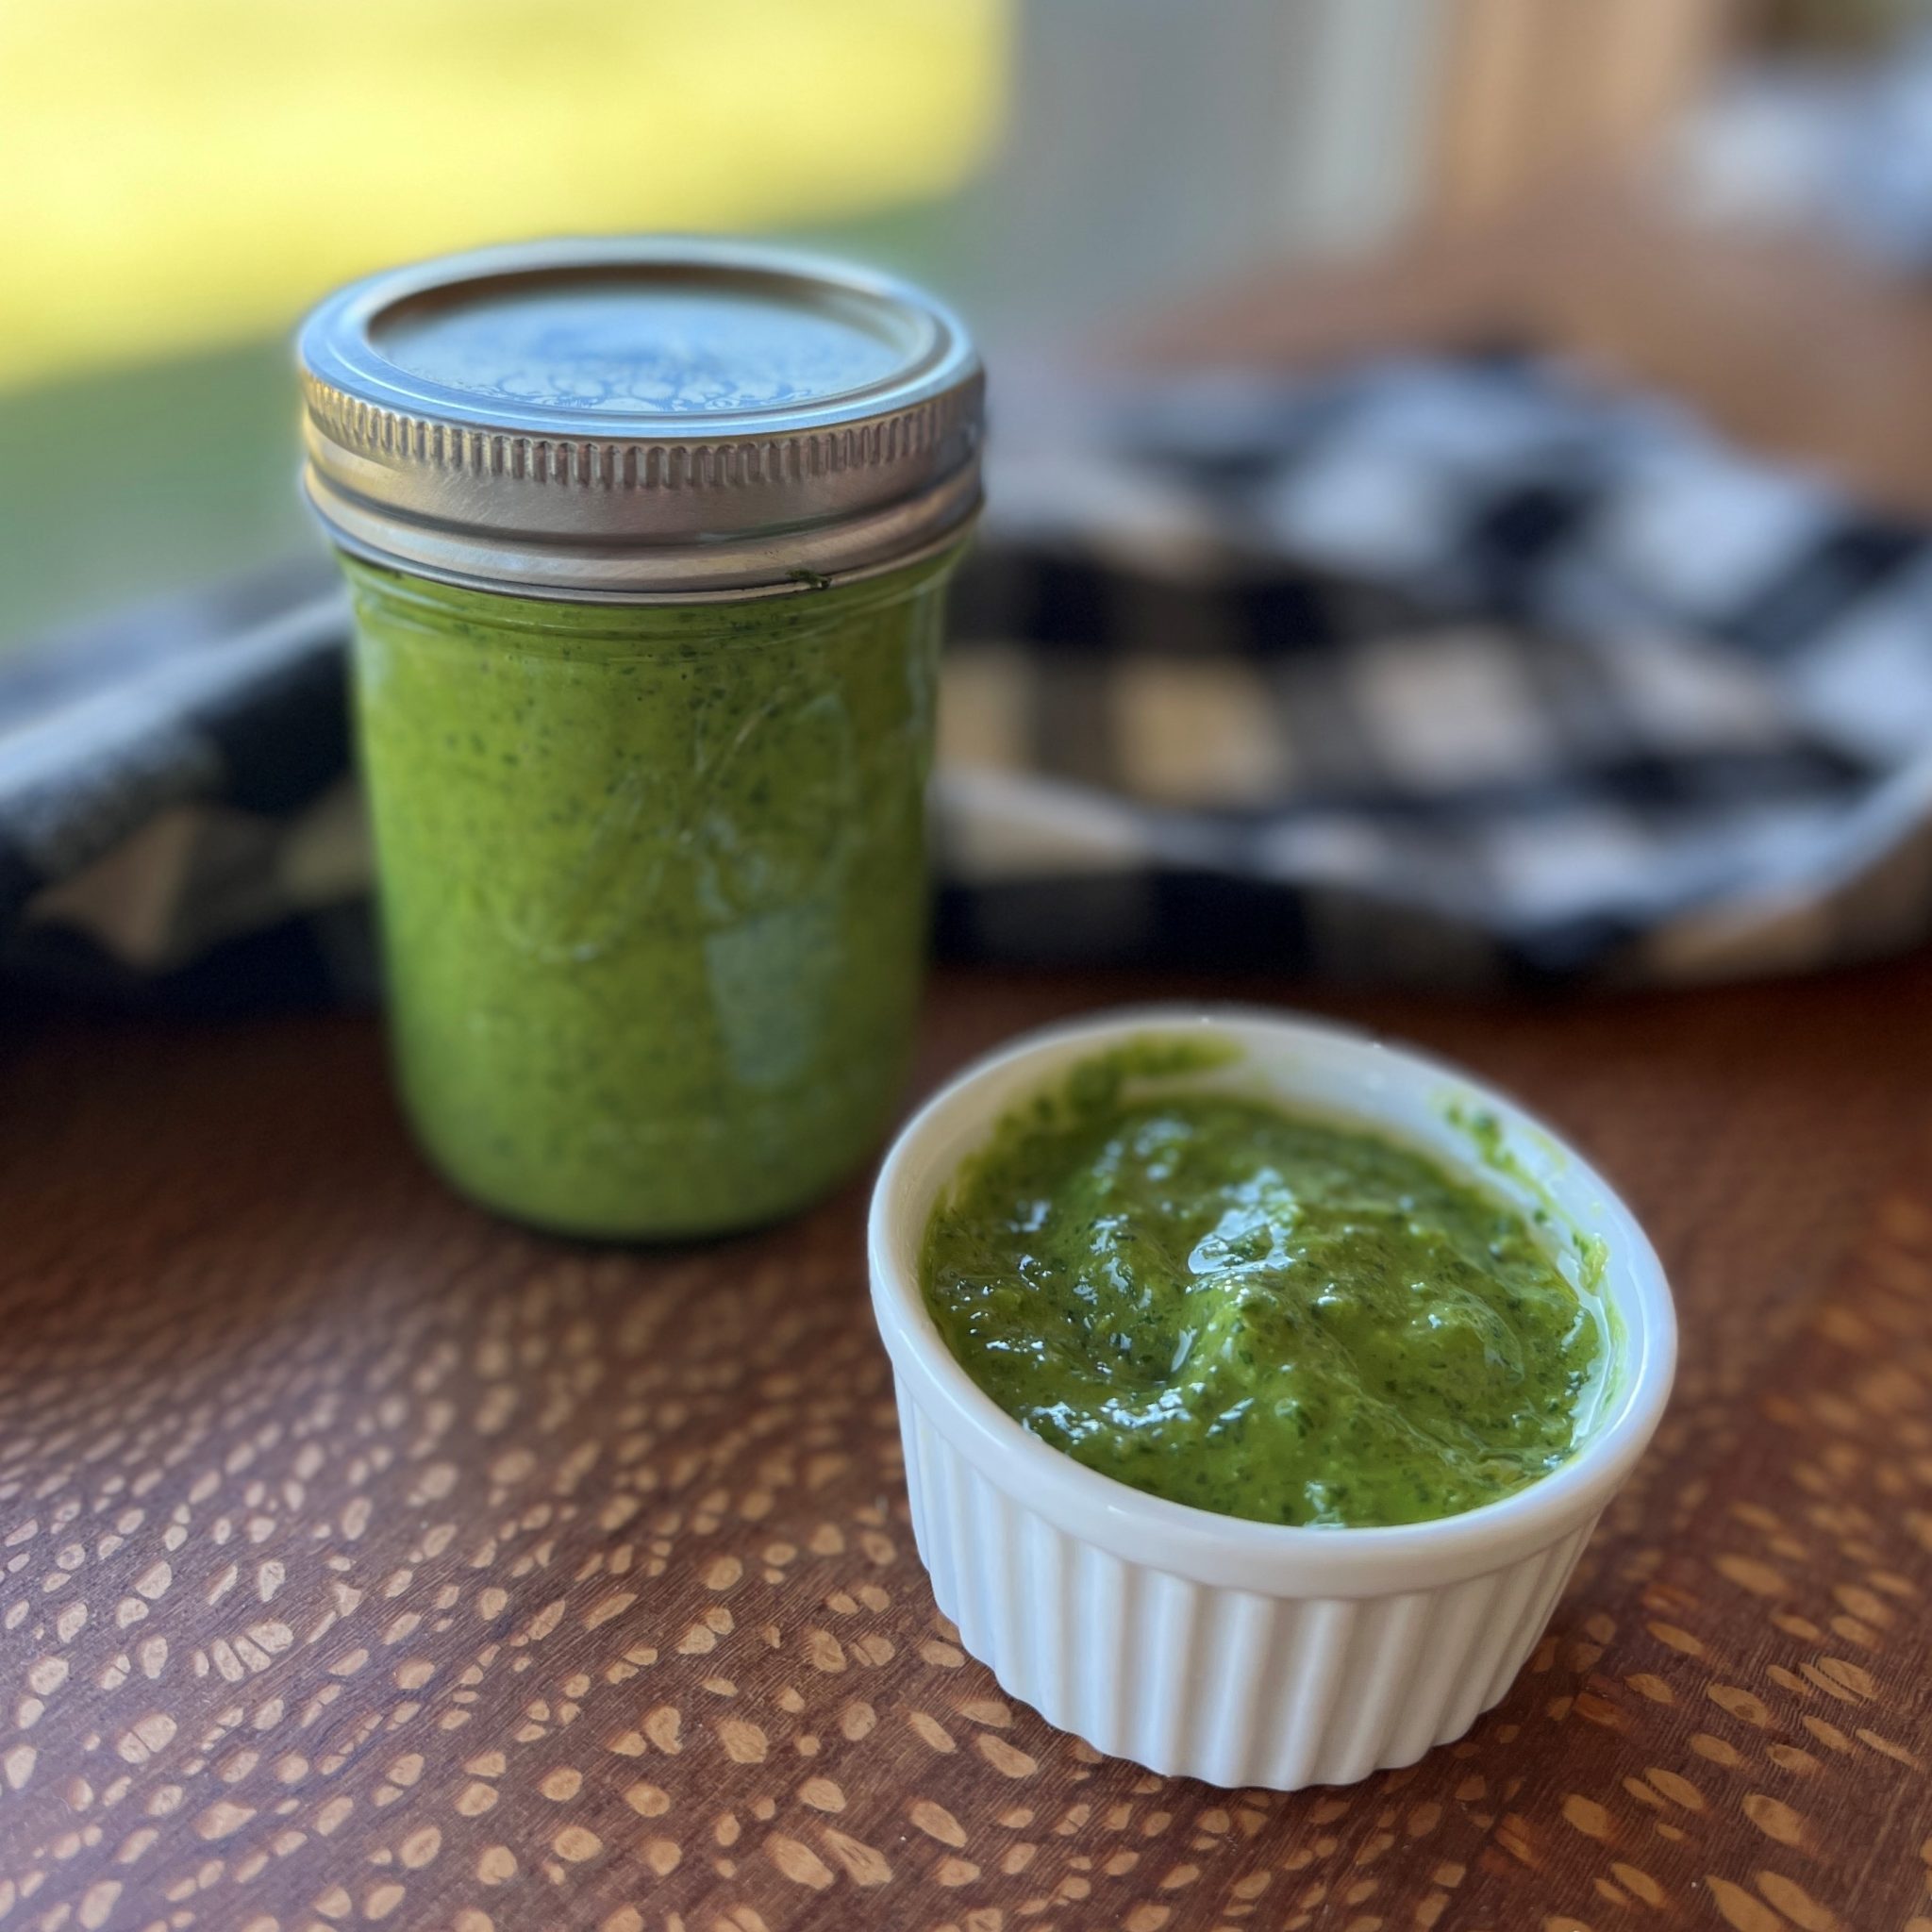 A jar and a bowl of summery green basil sauce.